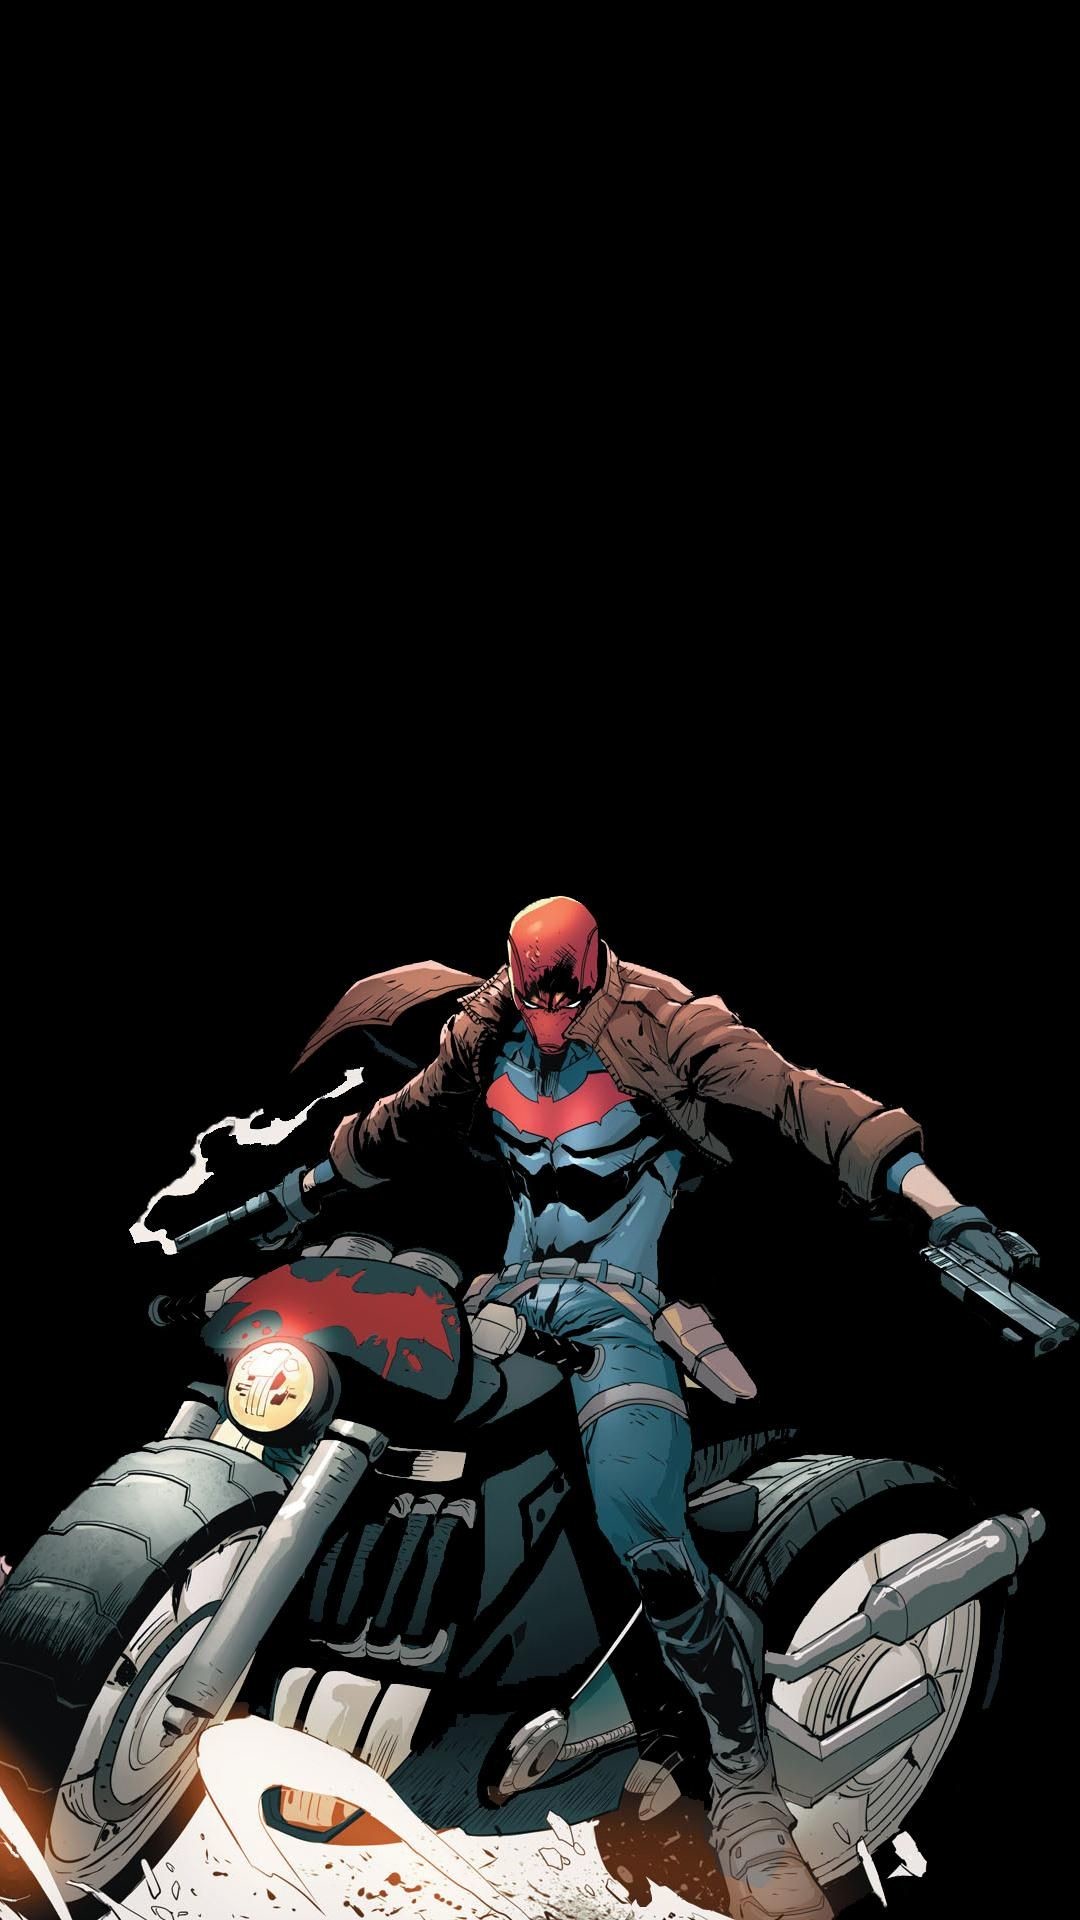 1080x1920 Couldn't find a Red Hood wallpaper with black backgroundso I made one using  a panel from RHATO Rebirth #1 (1080 x 1920)